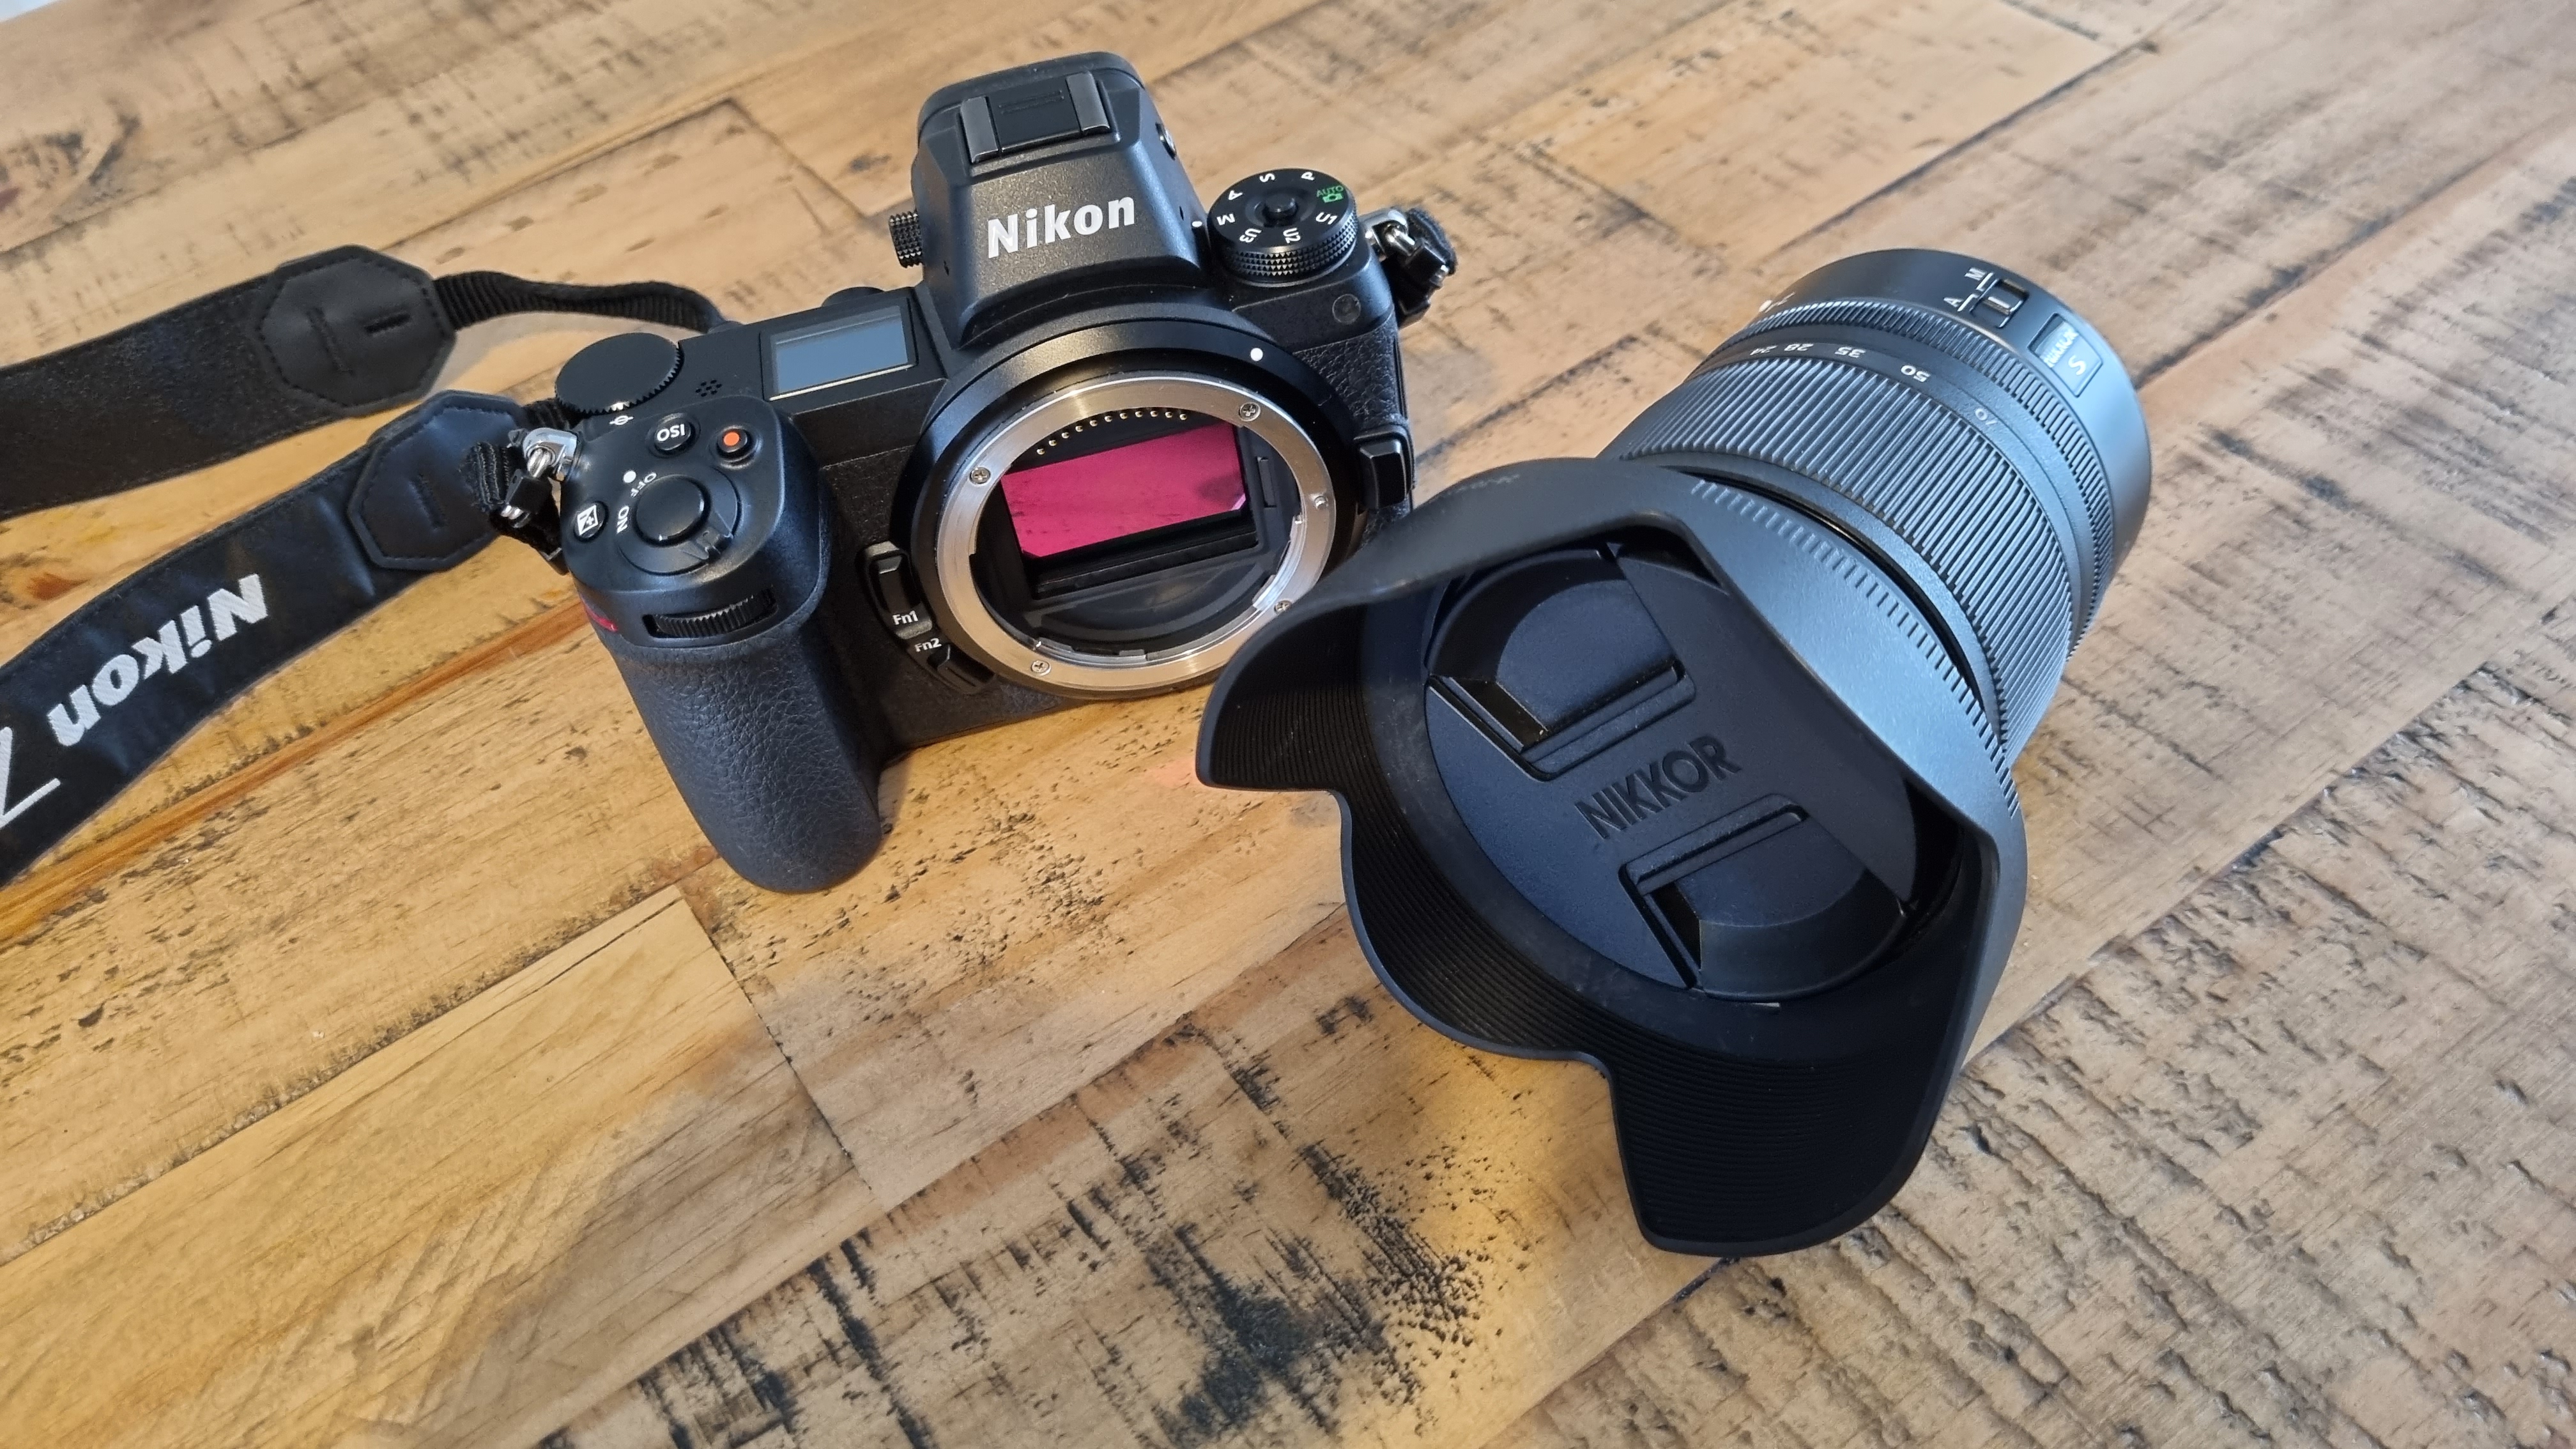 Nikon Z6 camera and lens on a wooden table